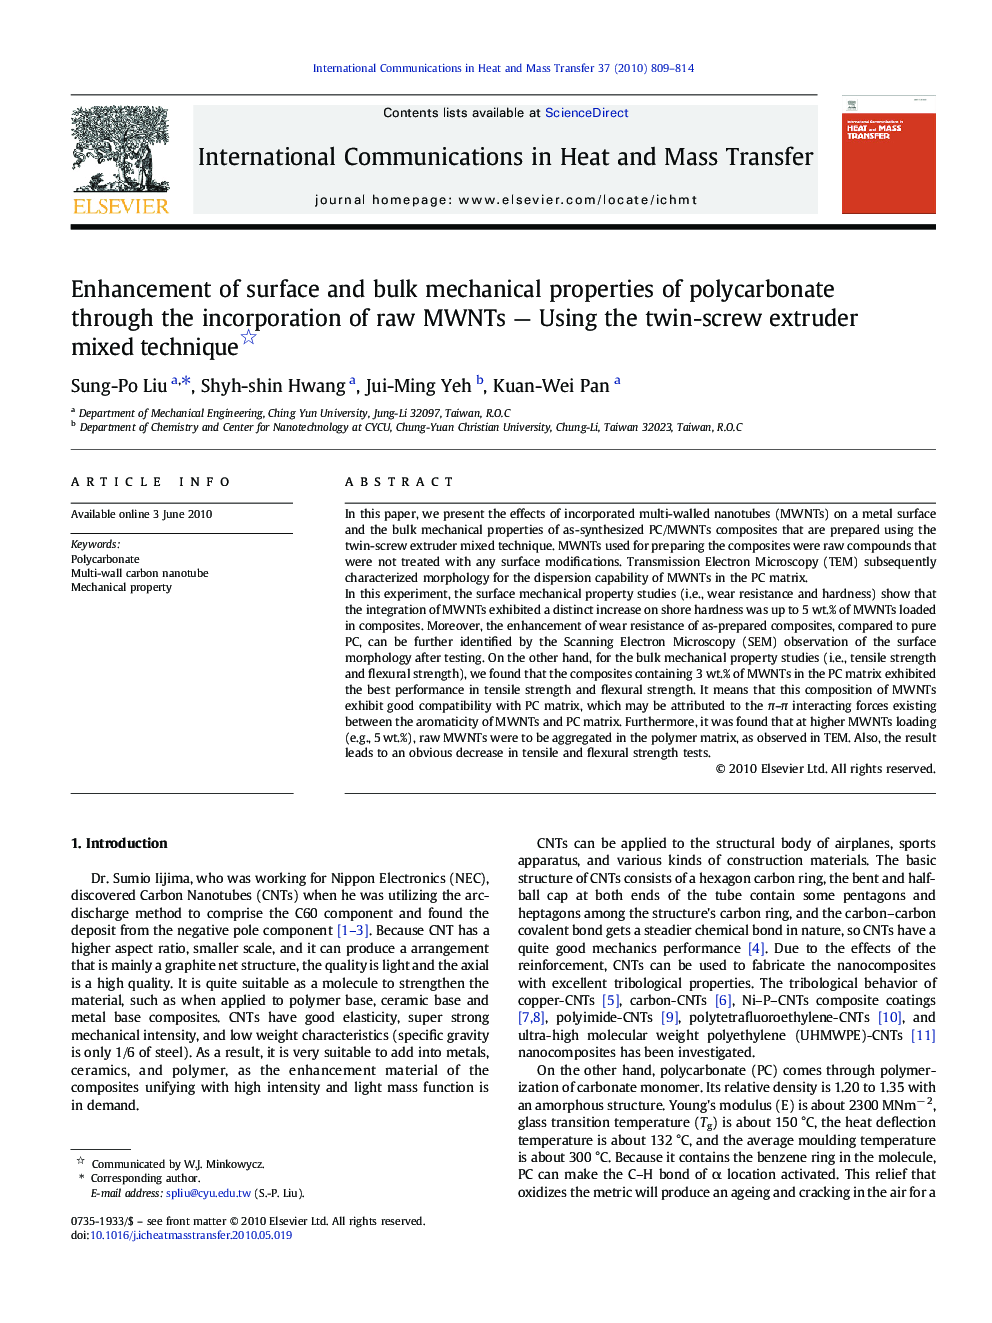 Enhancement of surface and bulk mechanical properties of polycarbonate through the incorporation of raw MWNTs — Using the twin-screw extruder mixed technique 